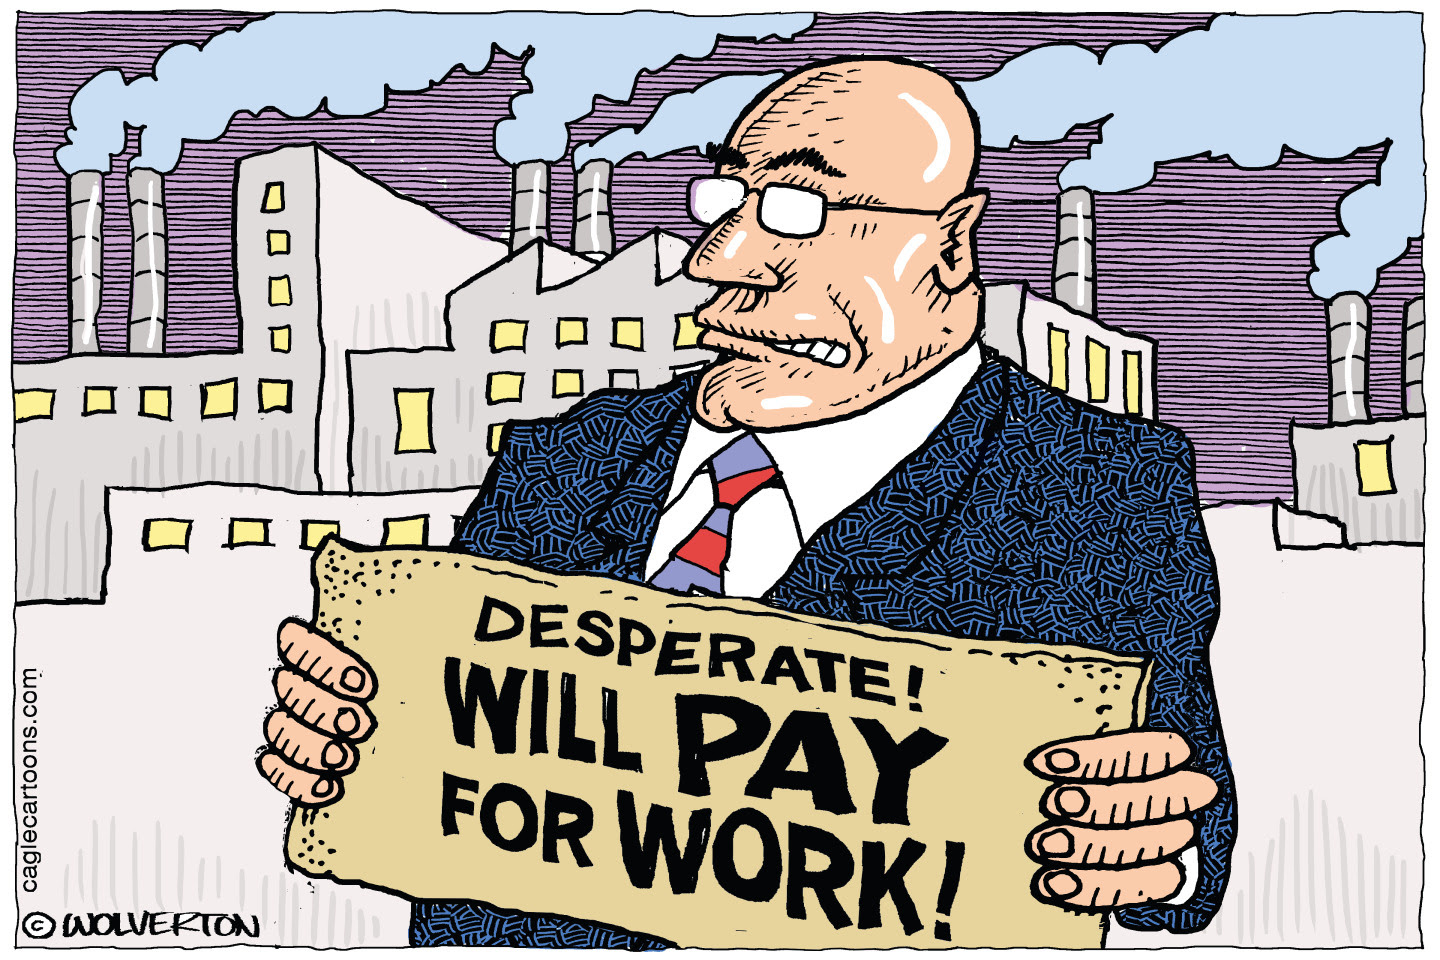 Corporations should pay a living wage to their workers